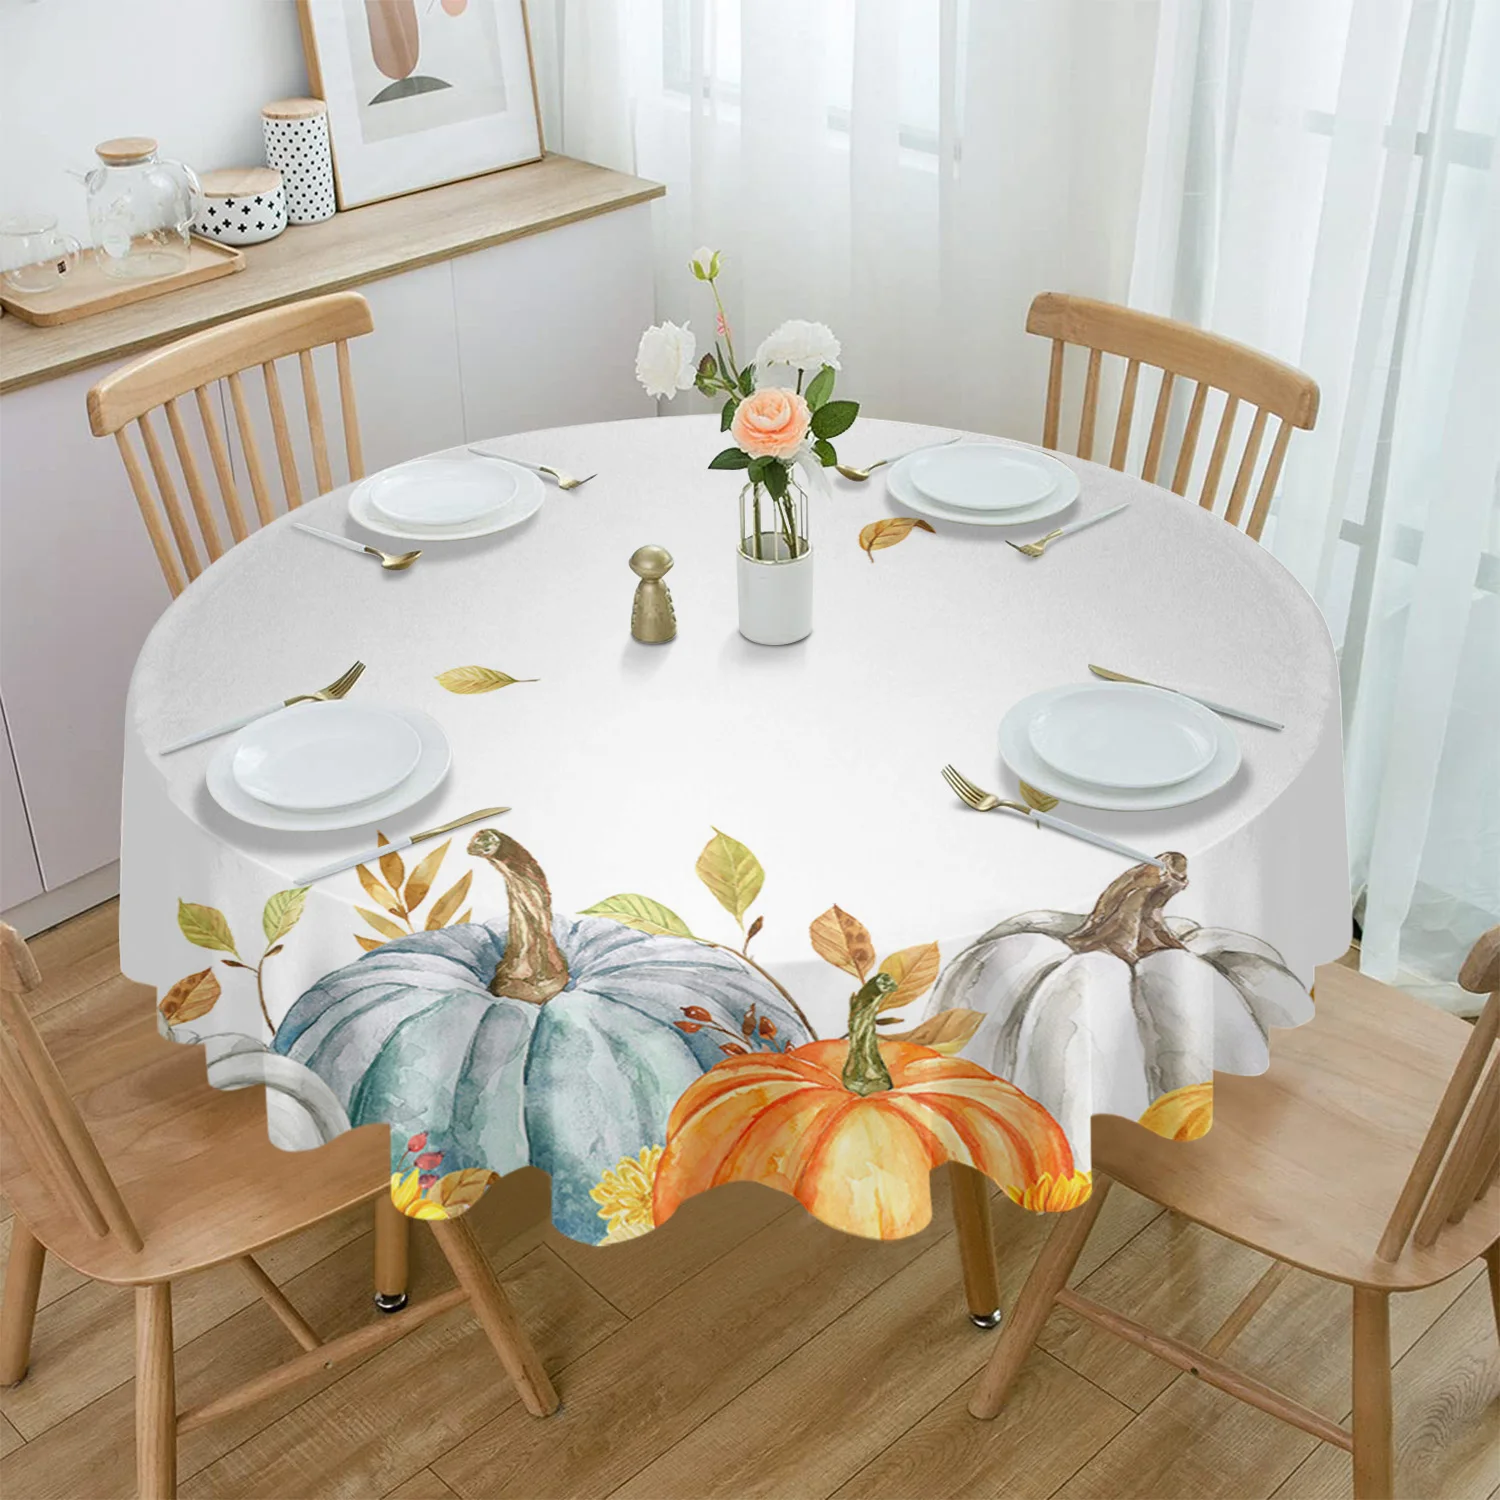 

Thanksgiving Pumpkin Autumn Leaves Round Tablecloth Party Kitchen Dinner Table Cover Holiday Decor Waterproof Tablecloths